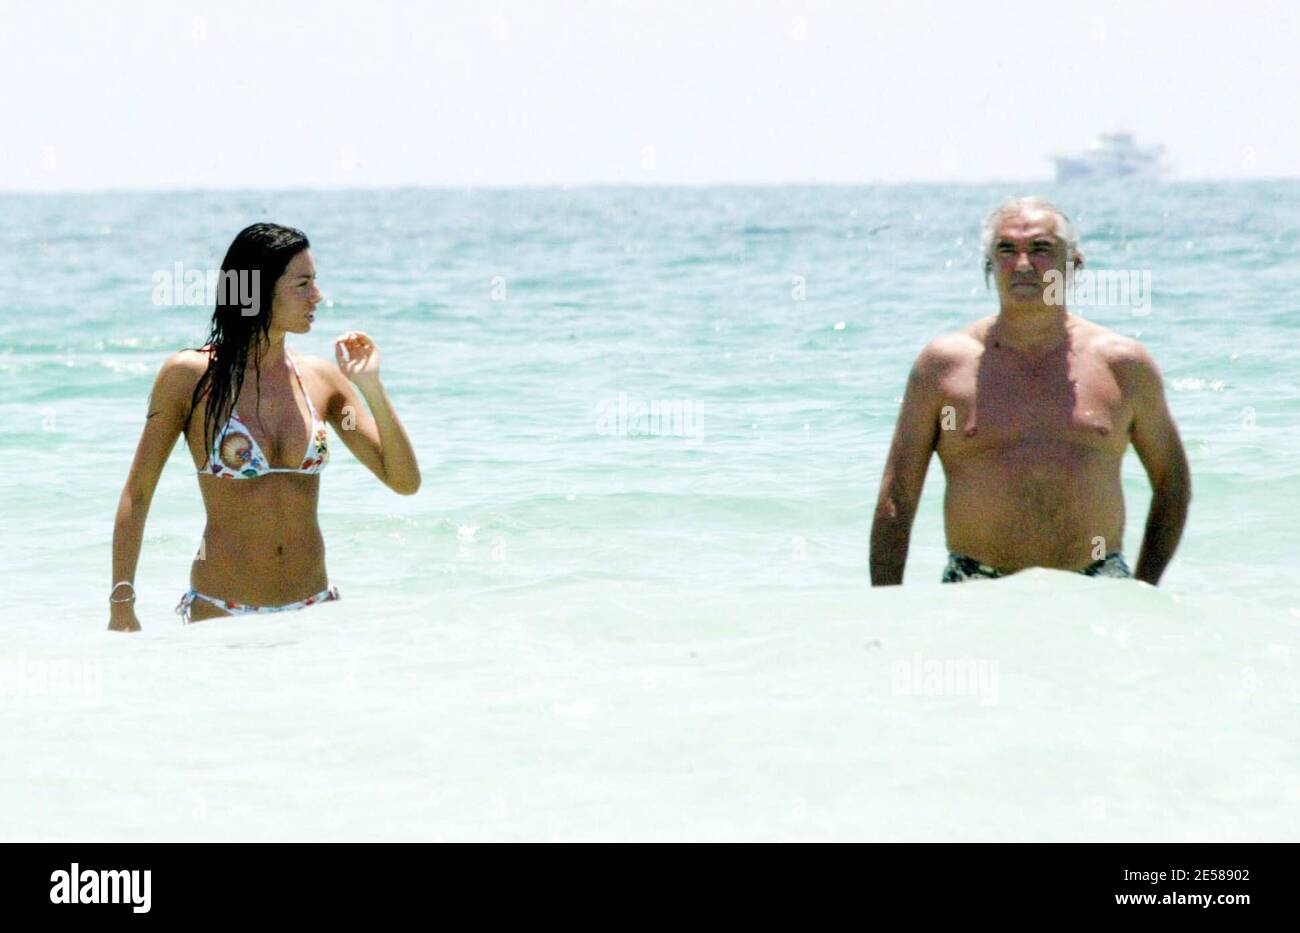 Exclusive!! Formula One Renault Boss Flavio Briatore and model girlfriend Elisabetta Gregoraci get playful on a recent trip to Florida. The pair got hot and heavy under the sun on Miami Beach and cooled off in the Ocean before returning to their hotel. Miami, Fla. 6/12/07. [[mab]] Stock Photo